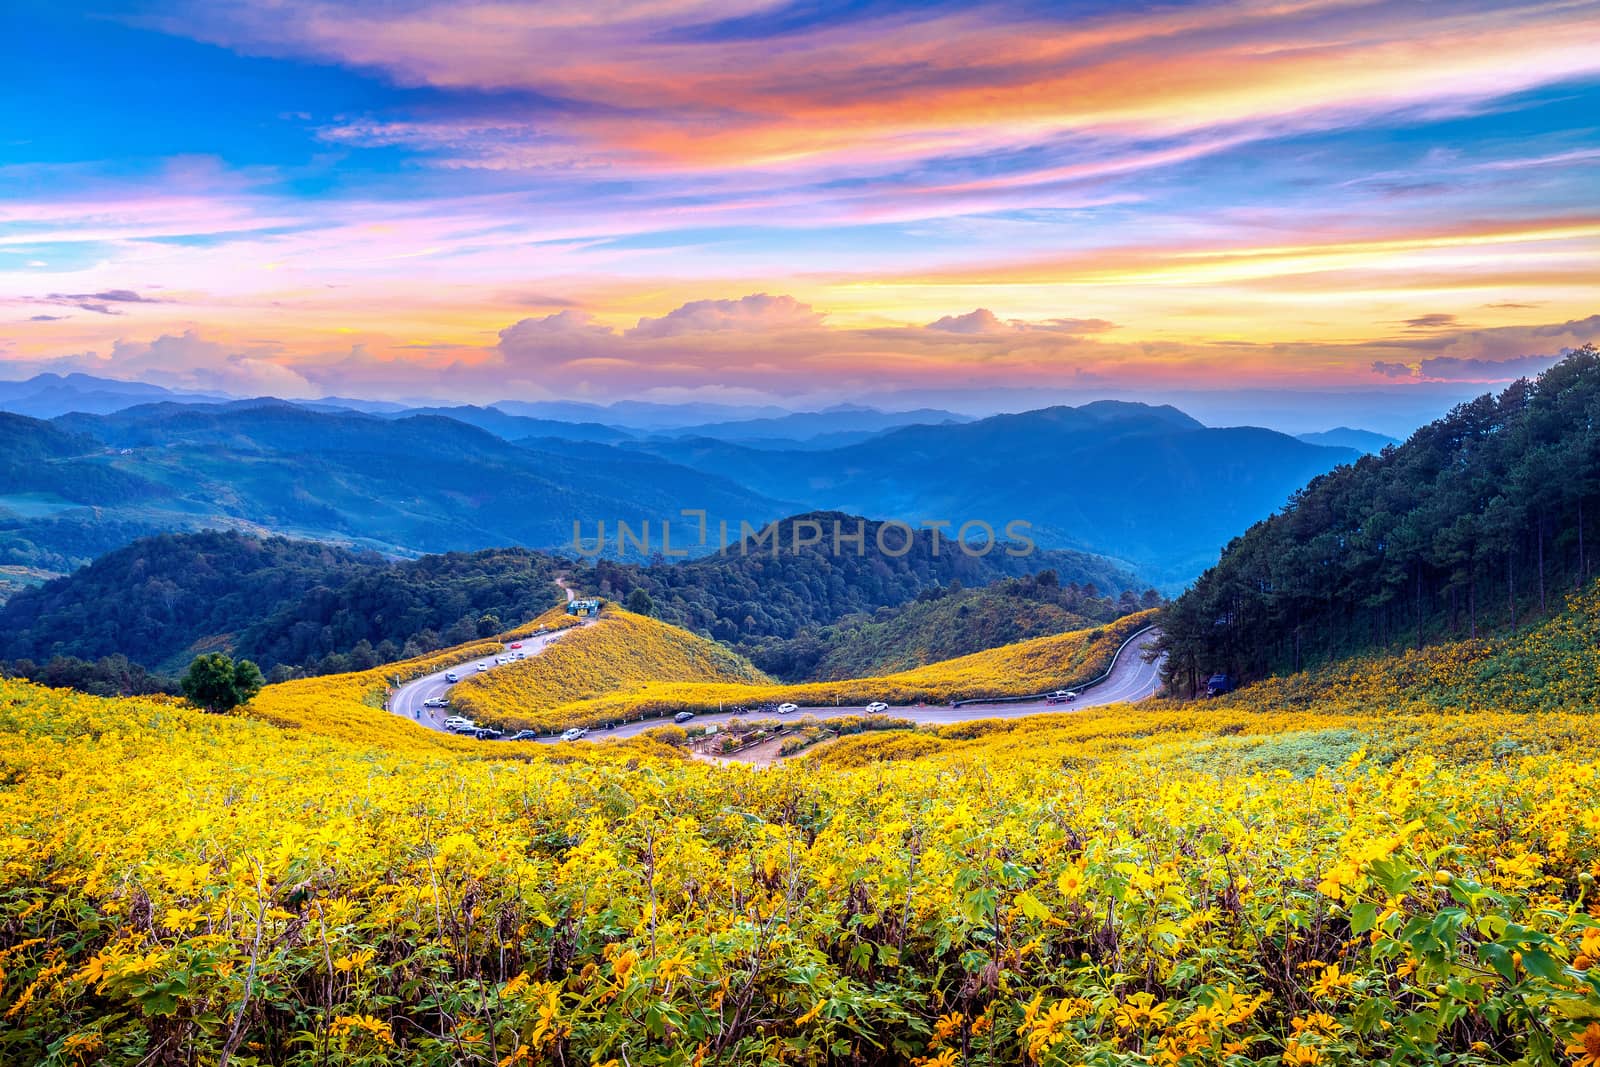 Tung Bua Tong Mexican sunflower field at sunset, Mae Hong Son Province in Thailand. by gutarphotoghaphy